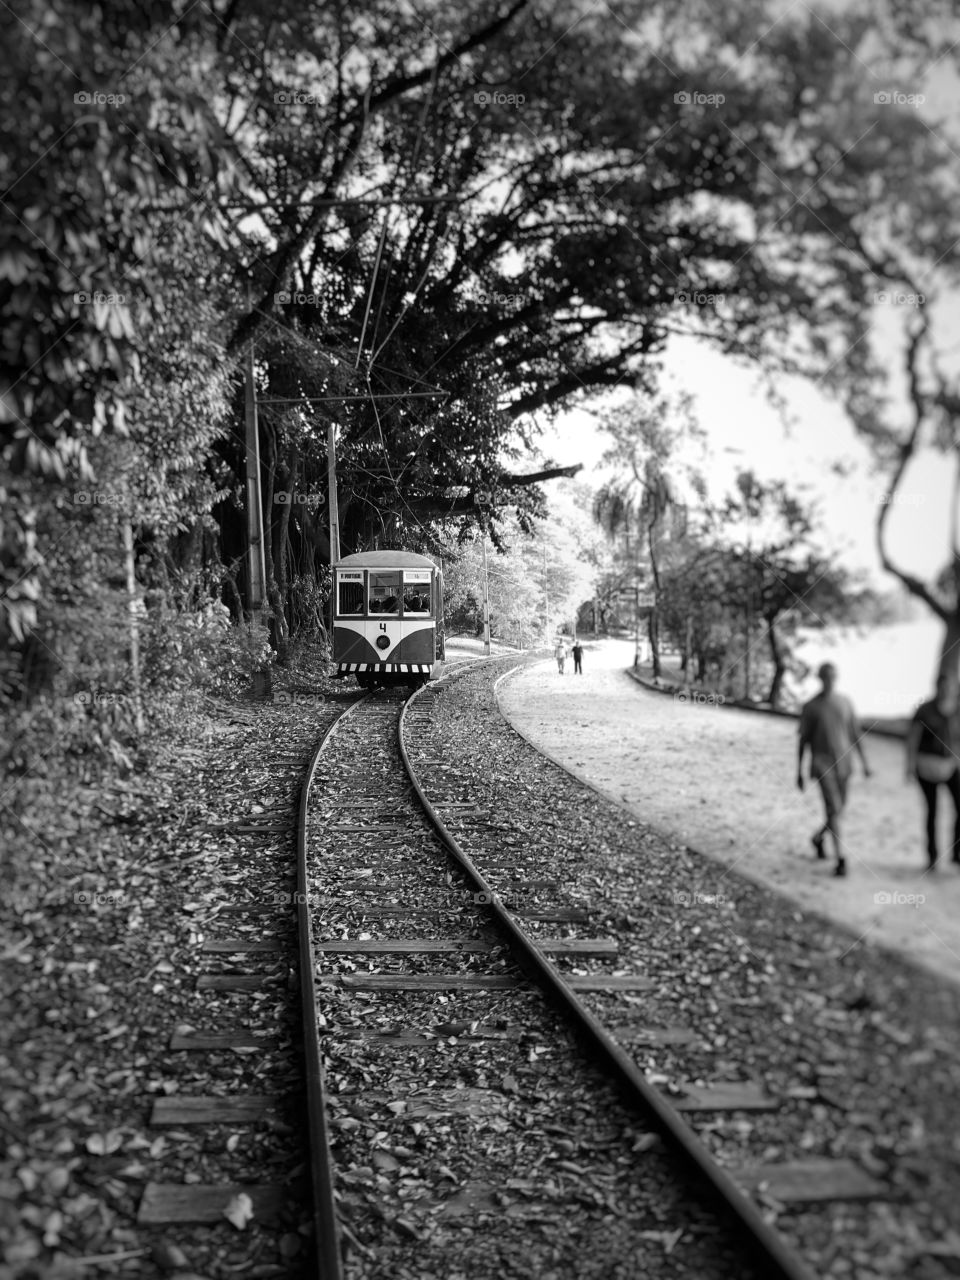 Old days, today. One of the great ways to understand the past is to experience it. This tram, in a park in the city was a great opportunity for that, while enjoying the scenery, the landscape, and the sunny day.